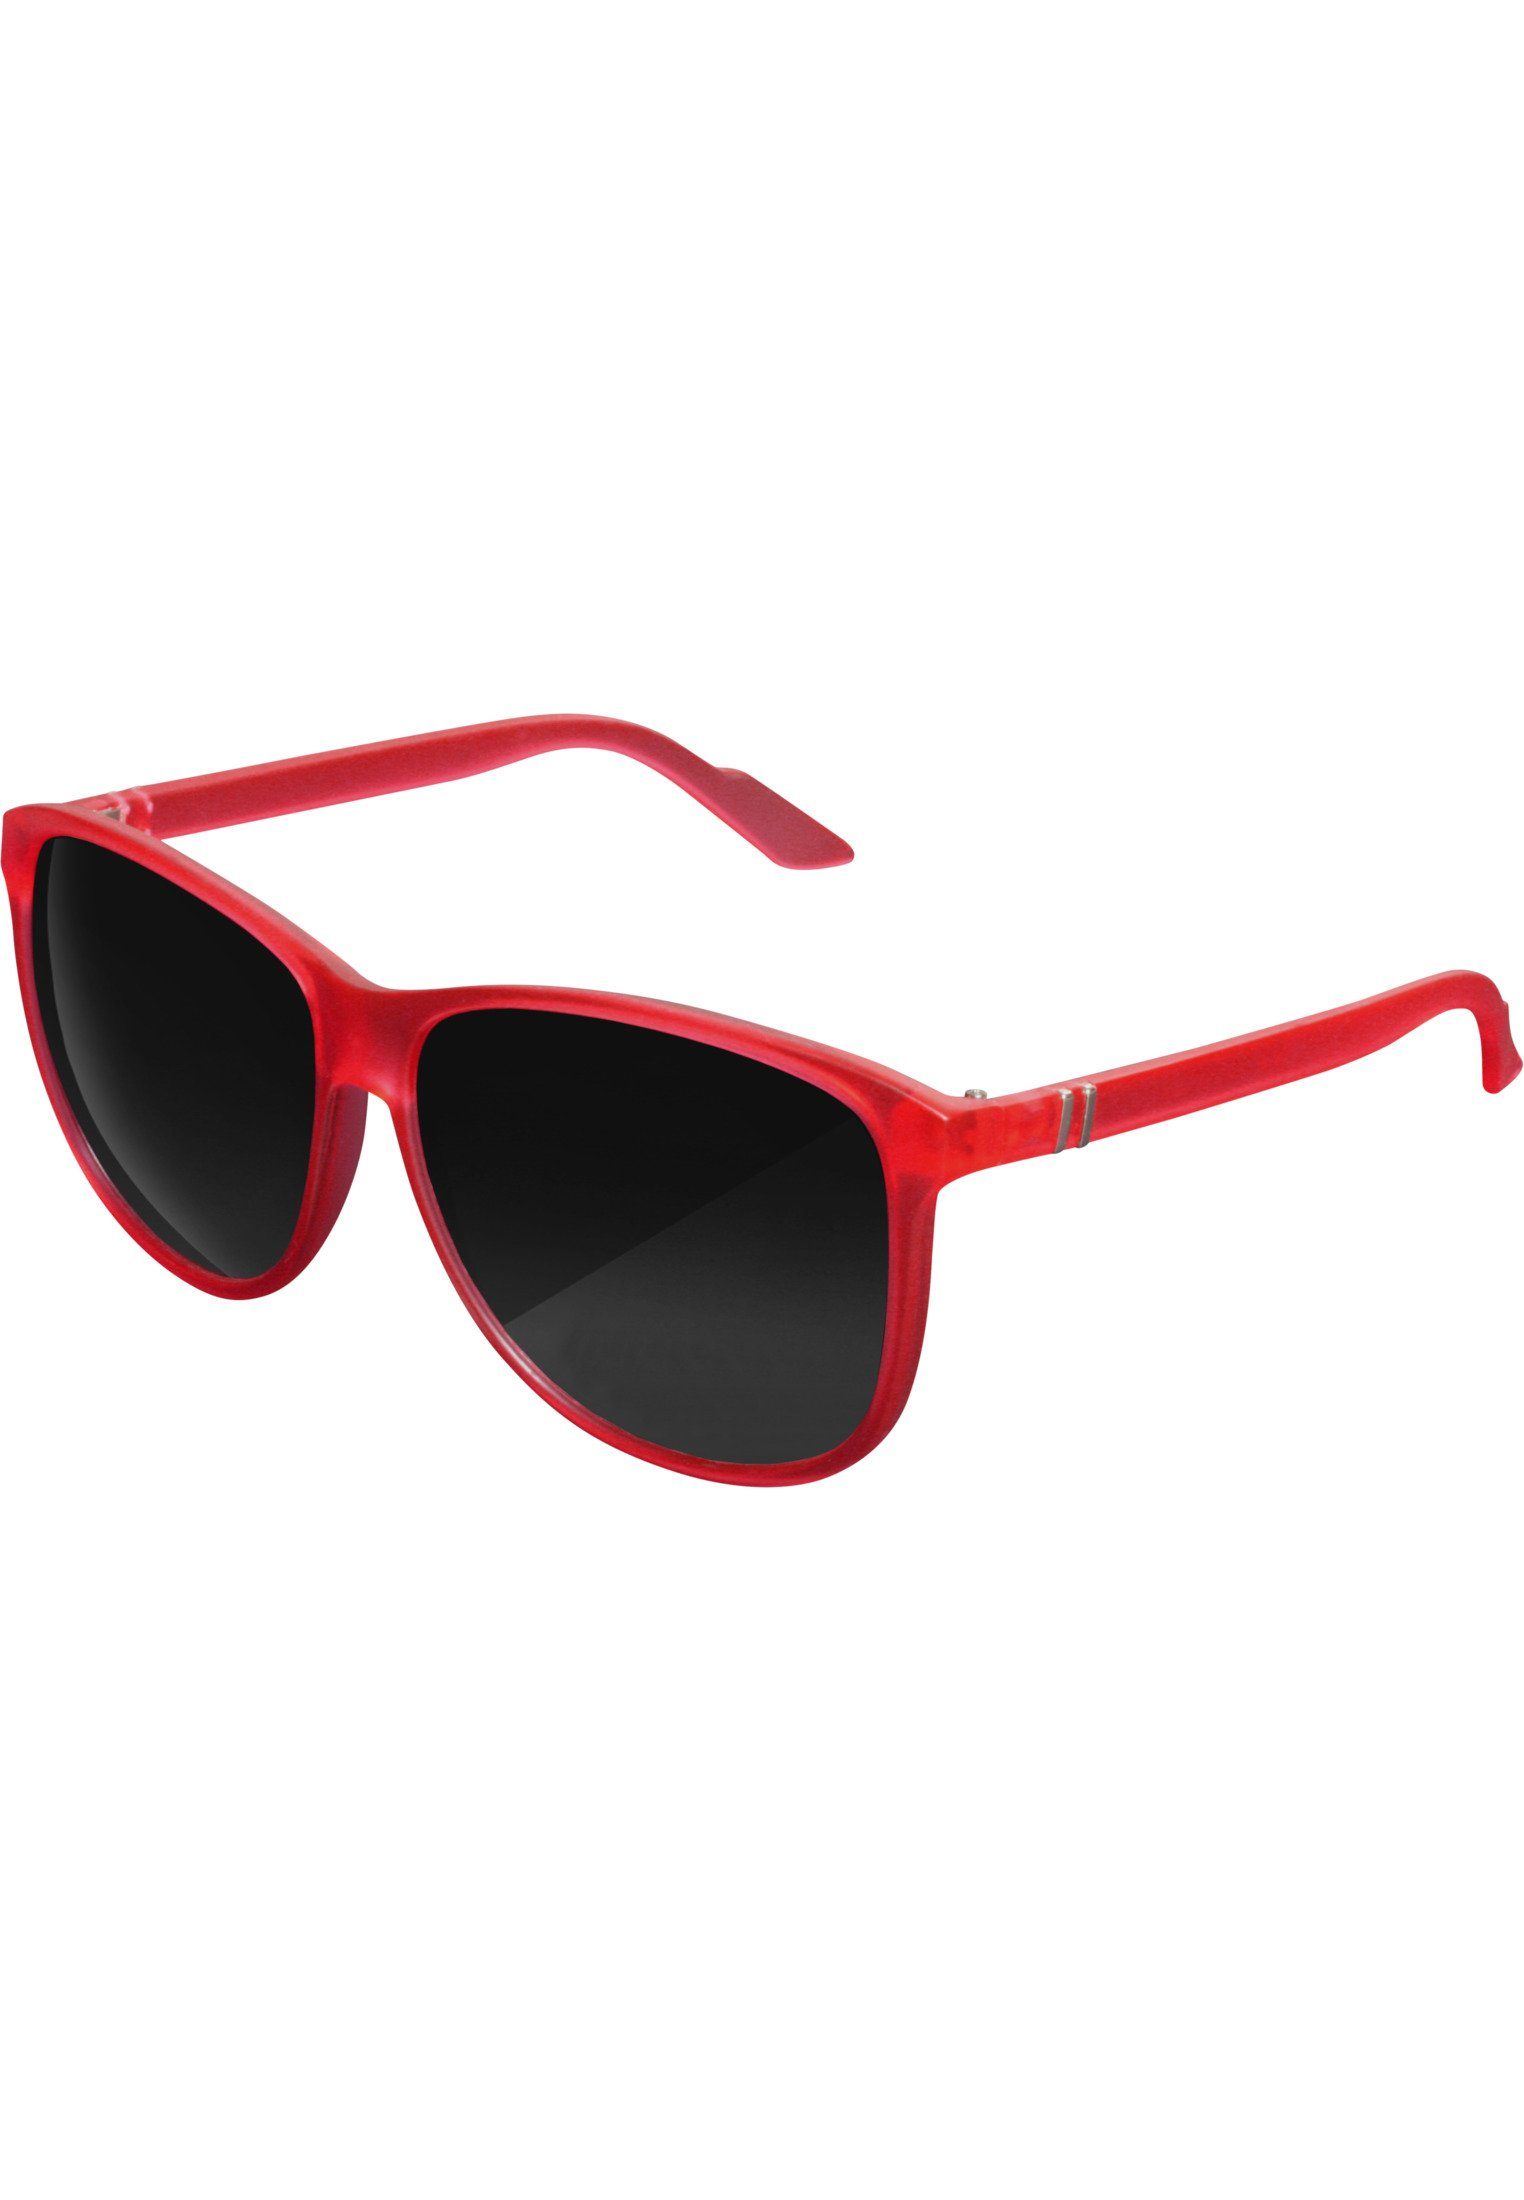 Sunglasses red Sonnenbrille Chirwa Accessoires MSTRDS